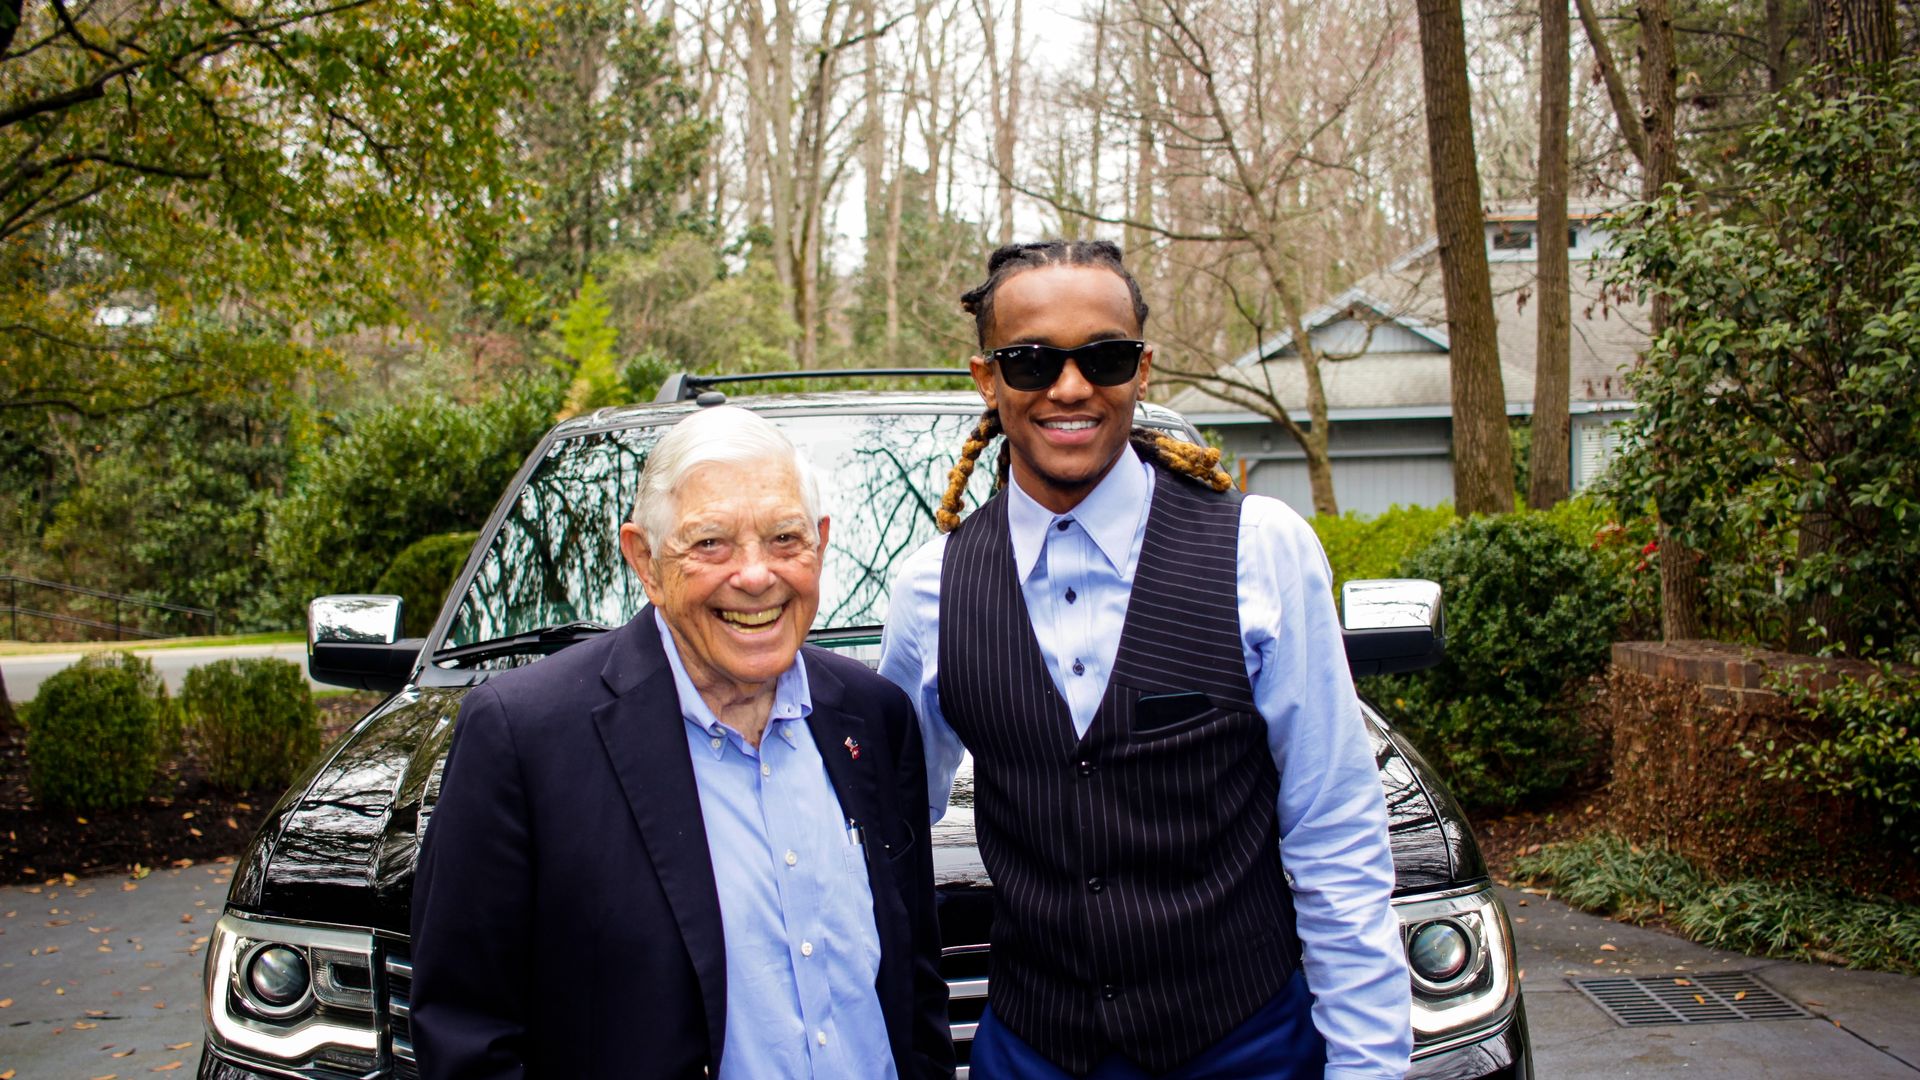 Hugh McColl in a blue shirt and sport coat next to Myles McGregor in a blue shirt and vest